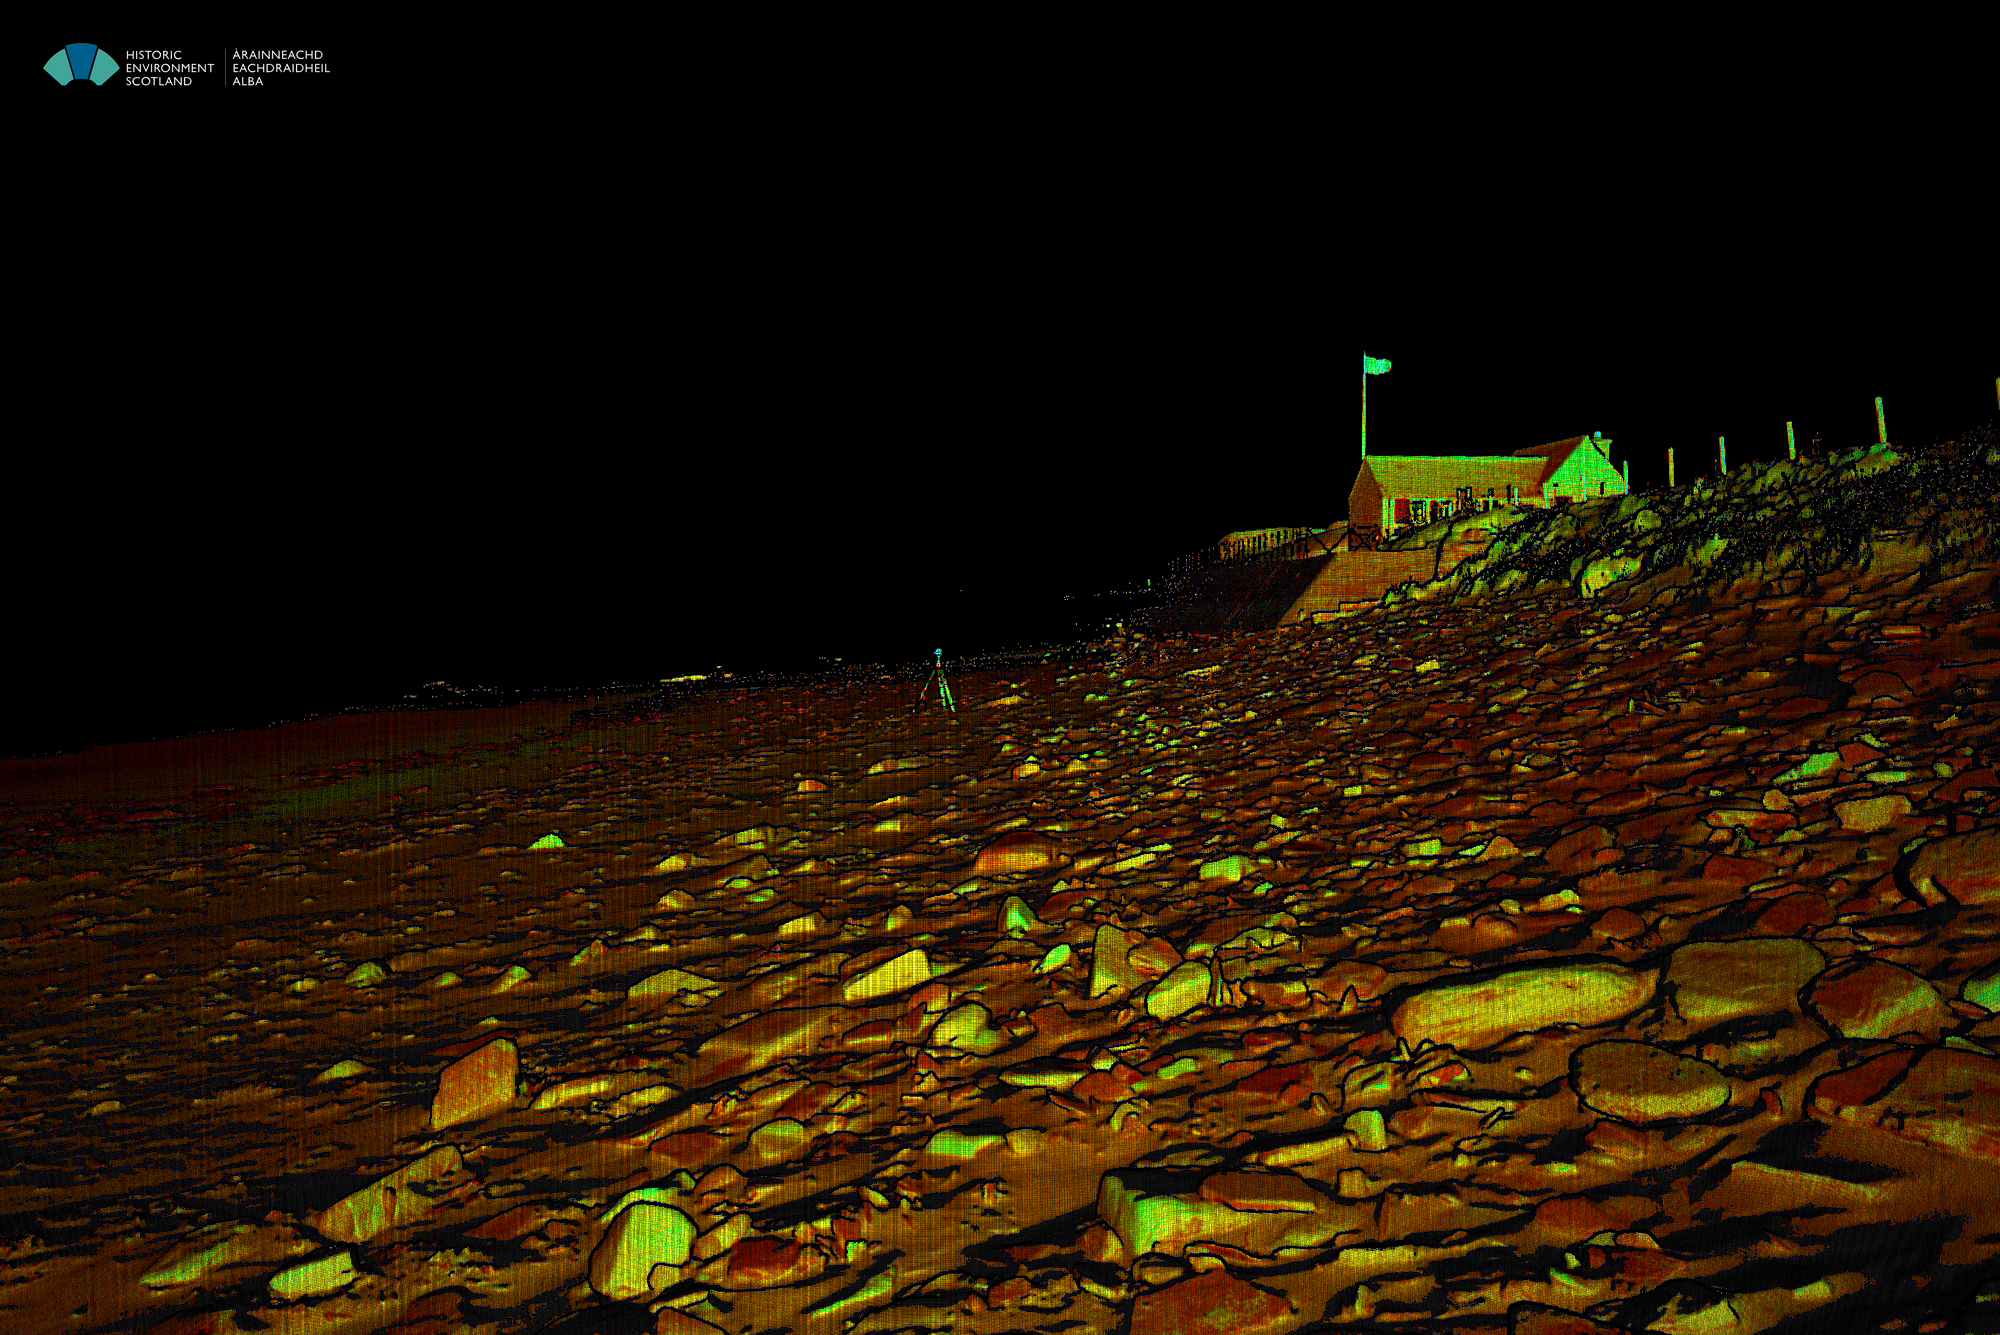 View of a single P40 scan from the beach, SW of the village. The small visitorsâ€™ hut is visible on the top right corner of the image.